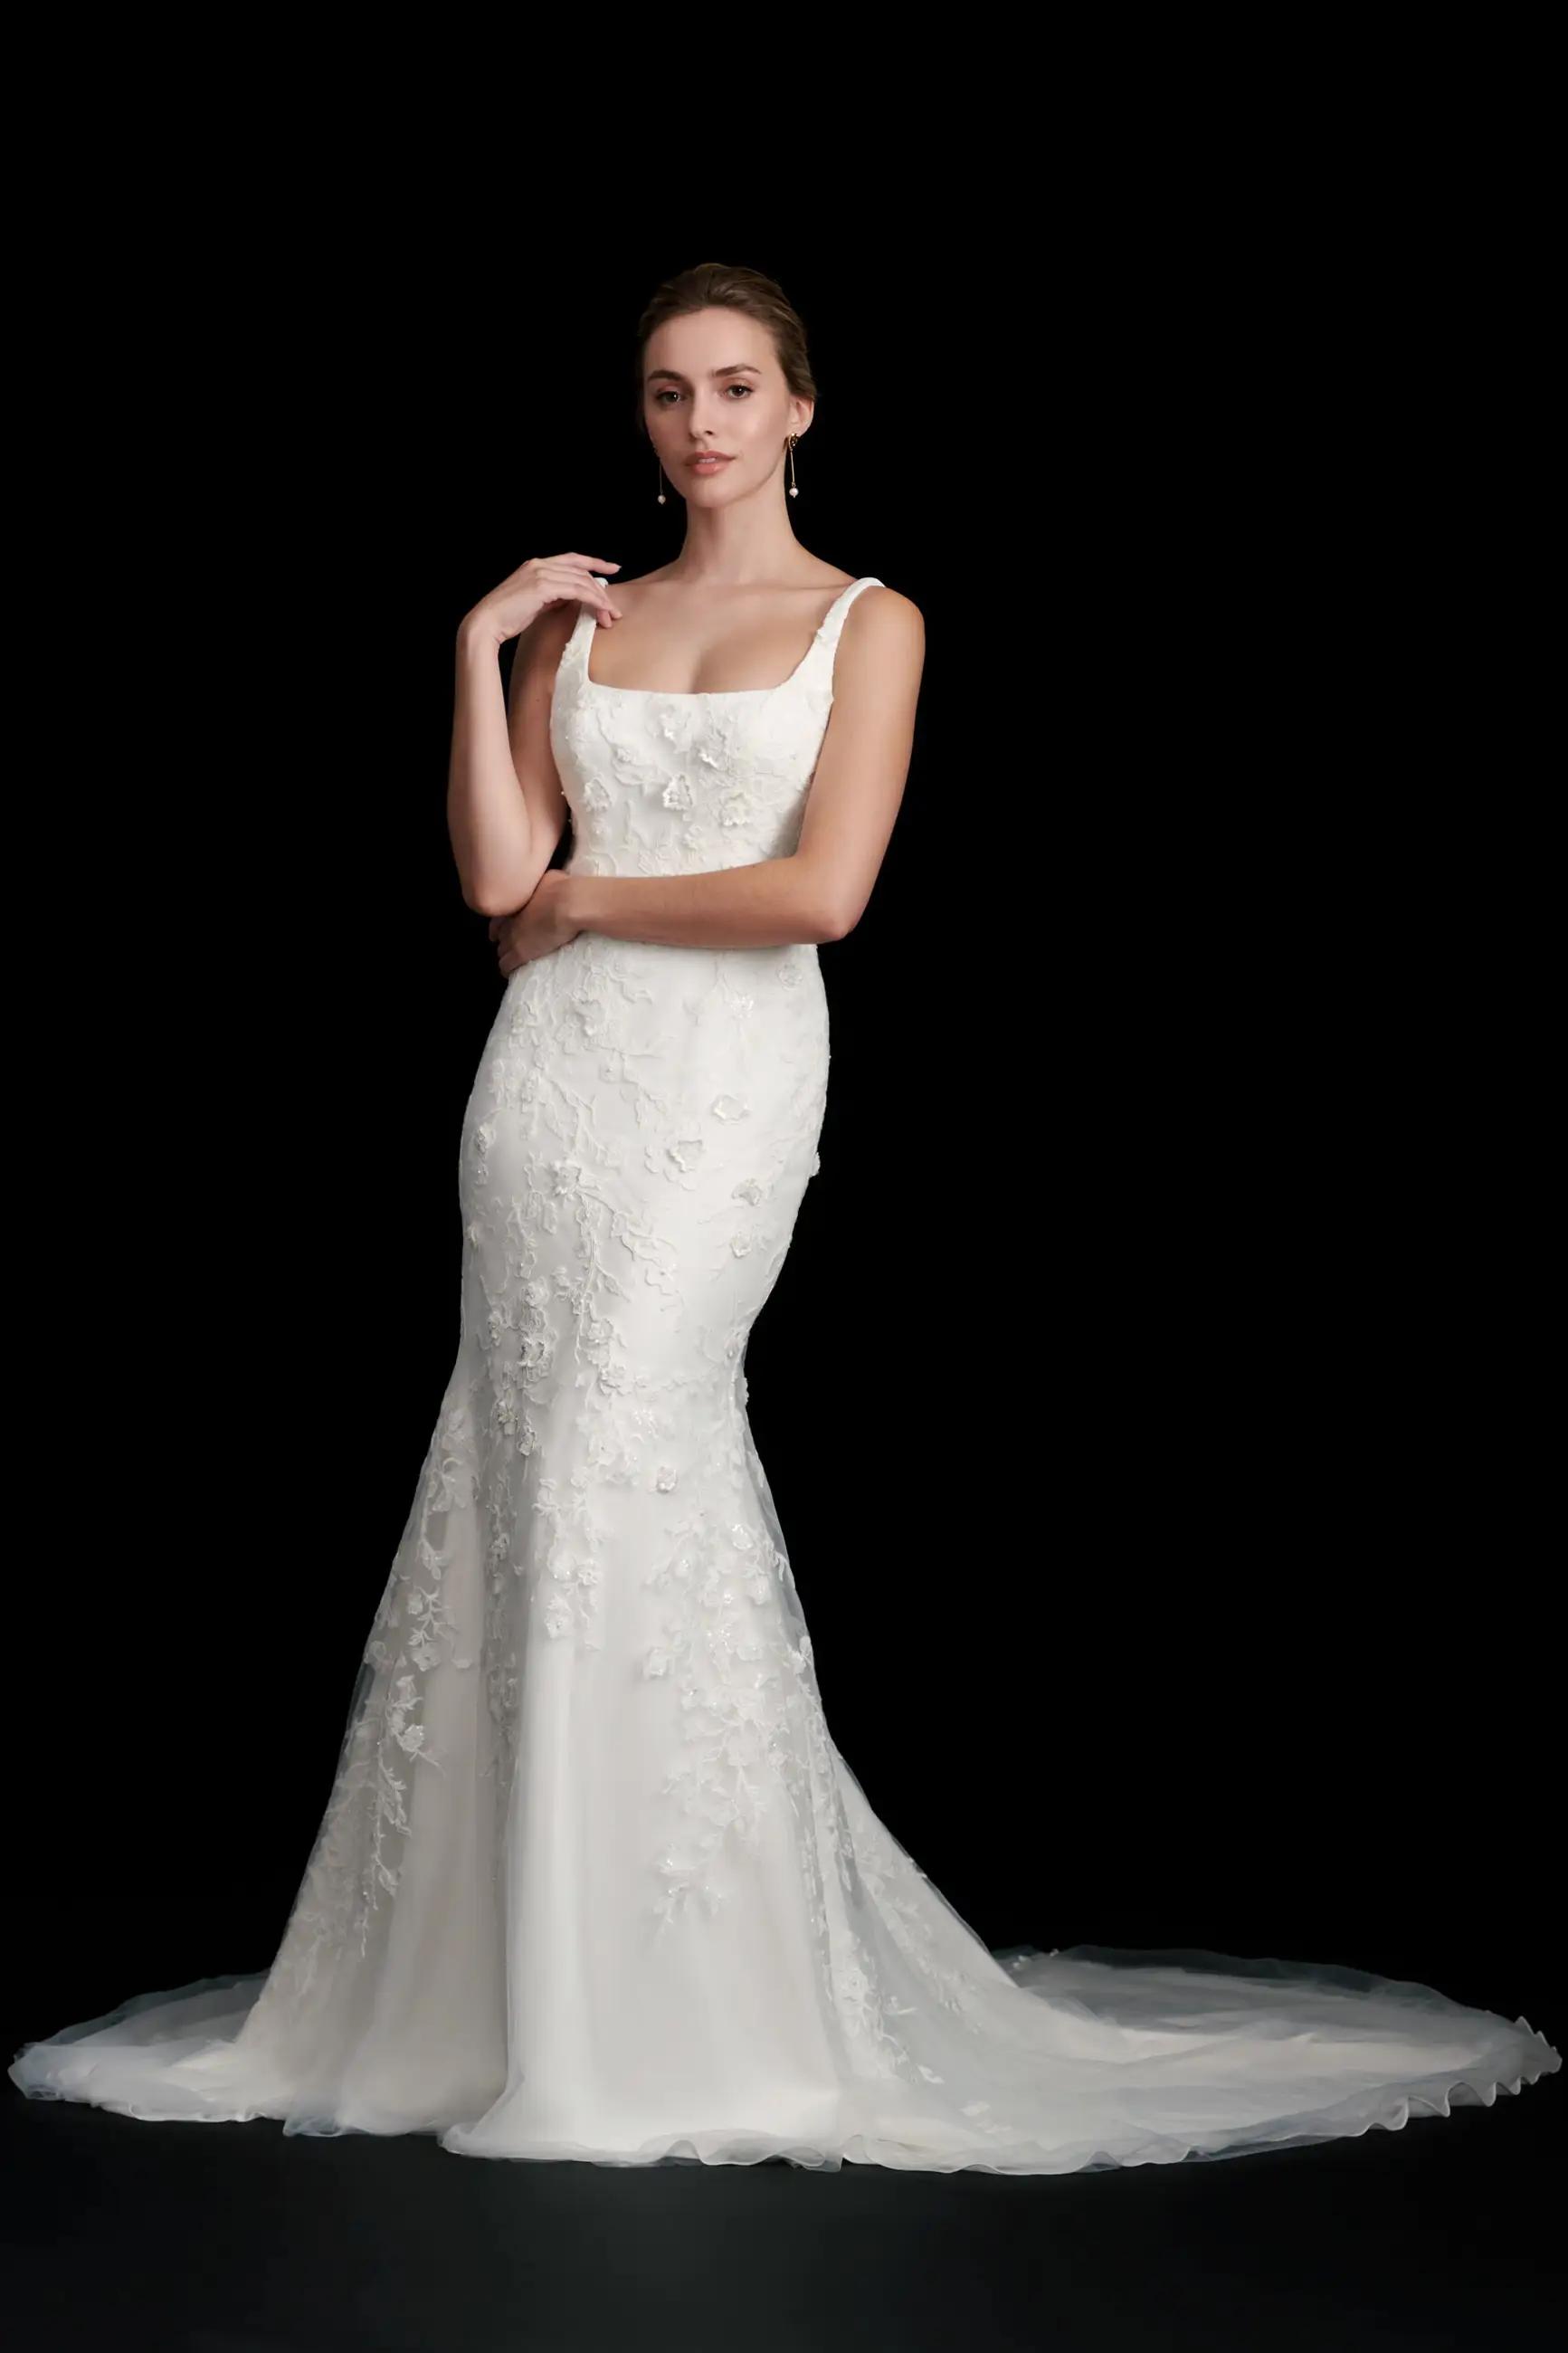 Josephine wedding dress by Kelly Faetanini with fit to flare silhouette and floral detail. Square neckline with low back